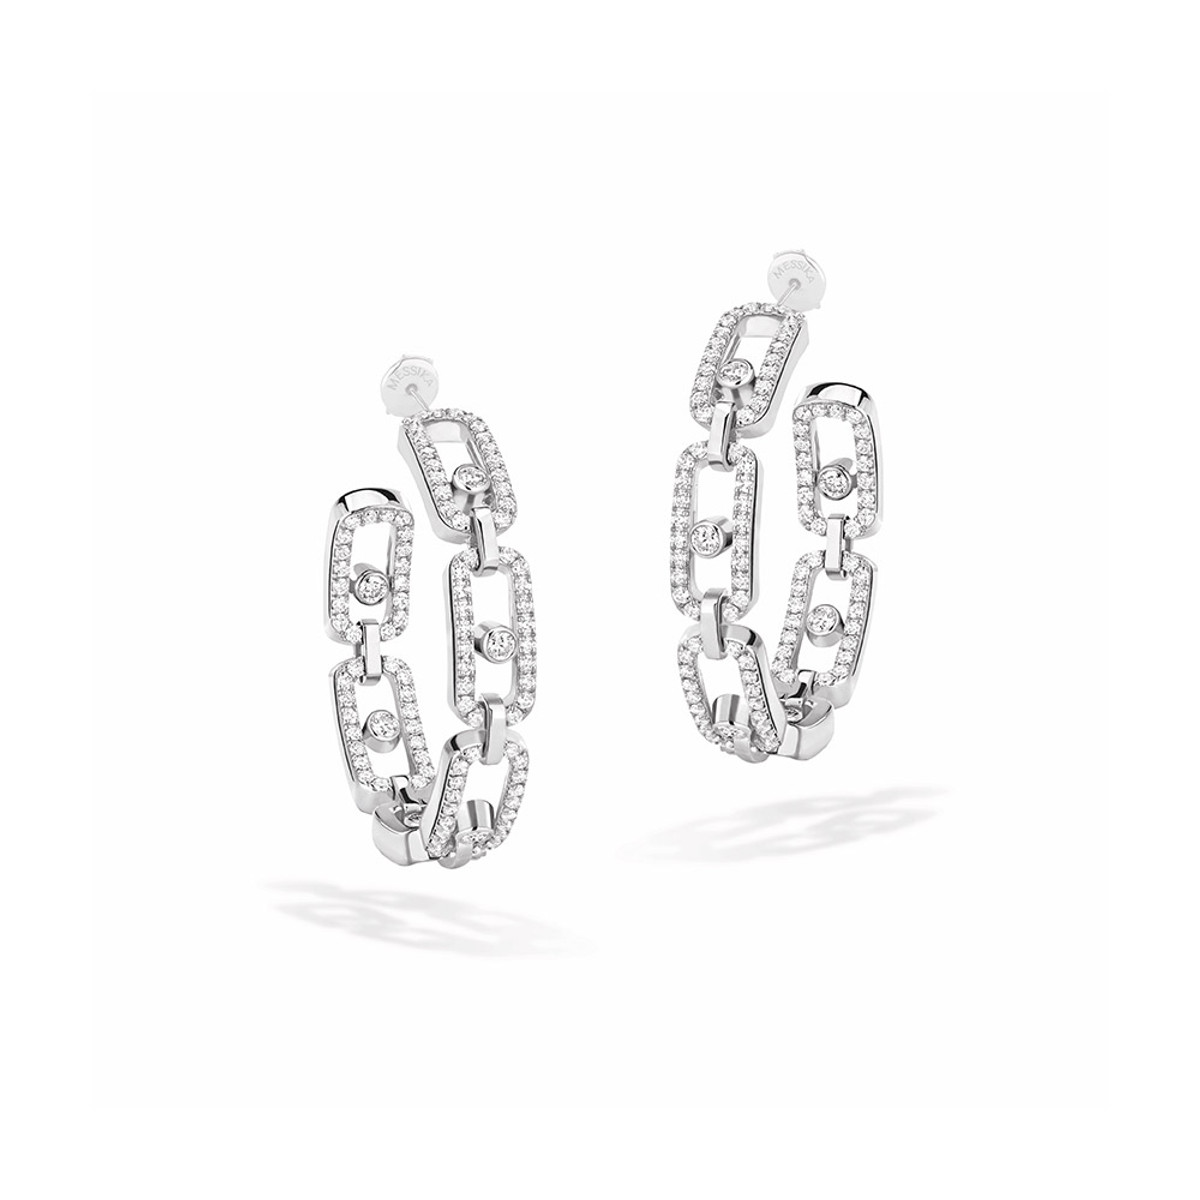 Messika 18K White Gold Move Link Diamond Hoop Earrings-56318 Product Image